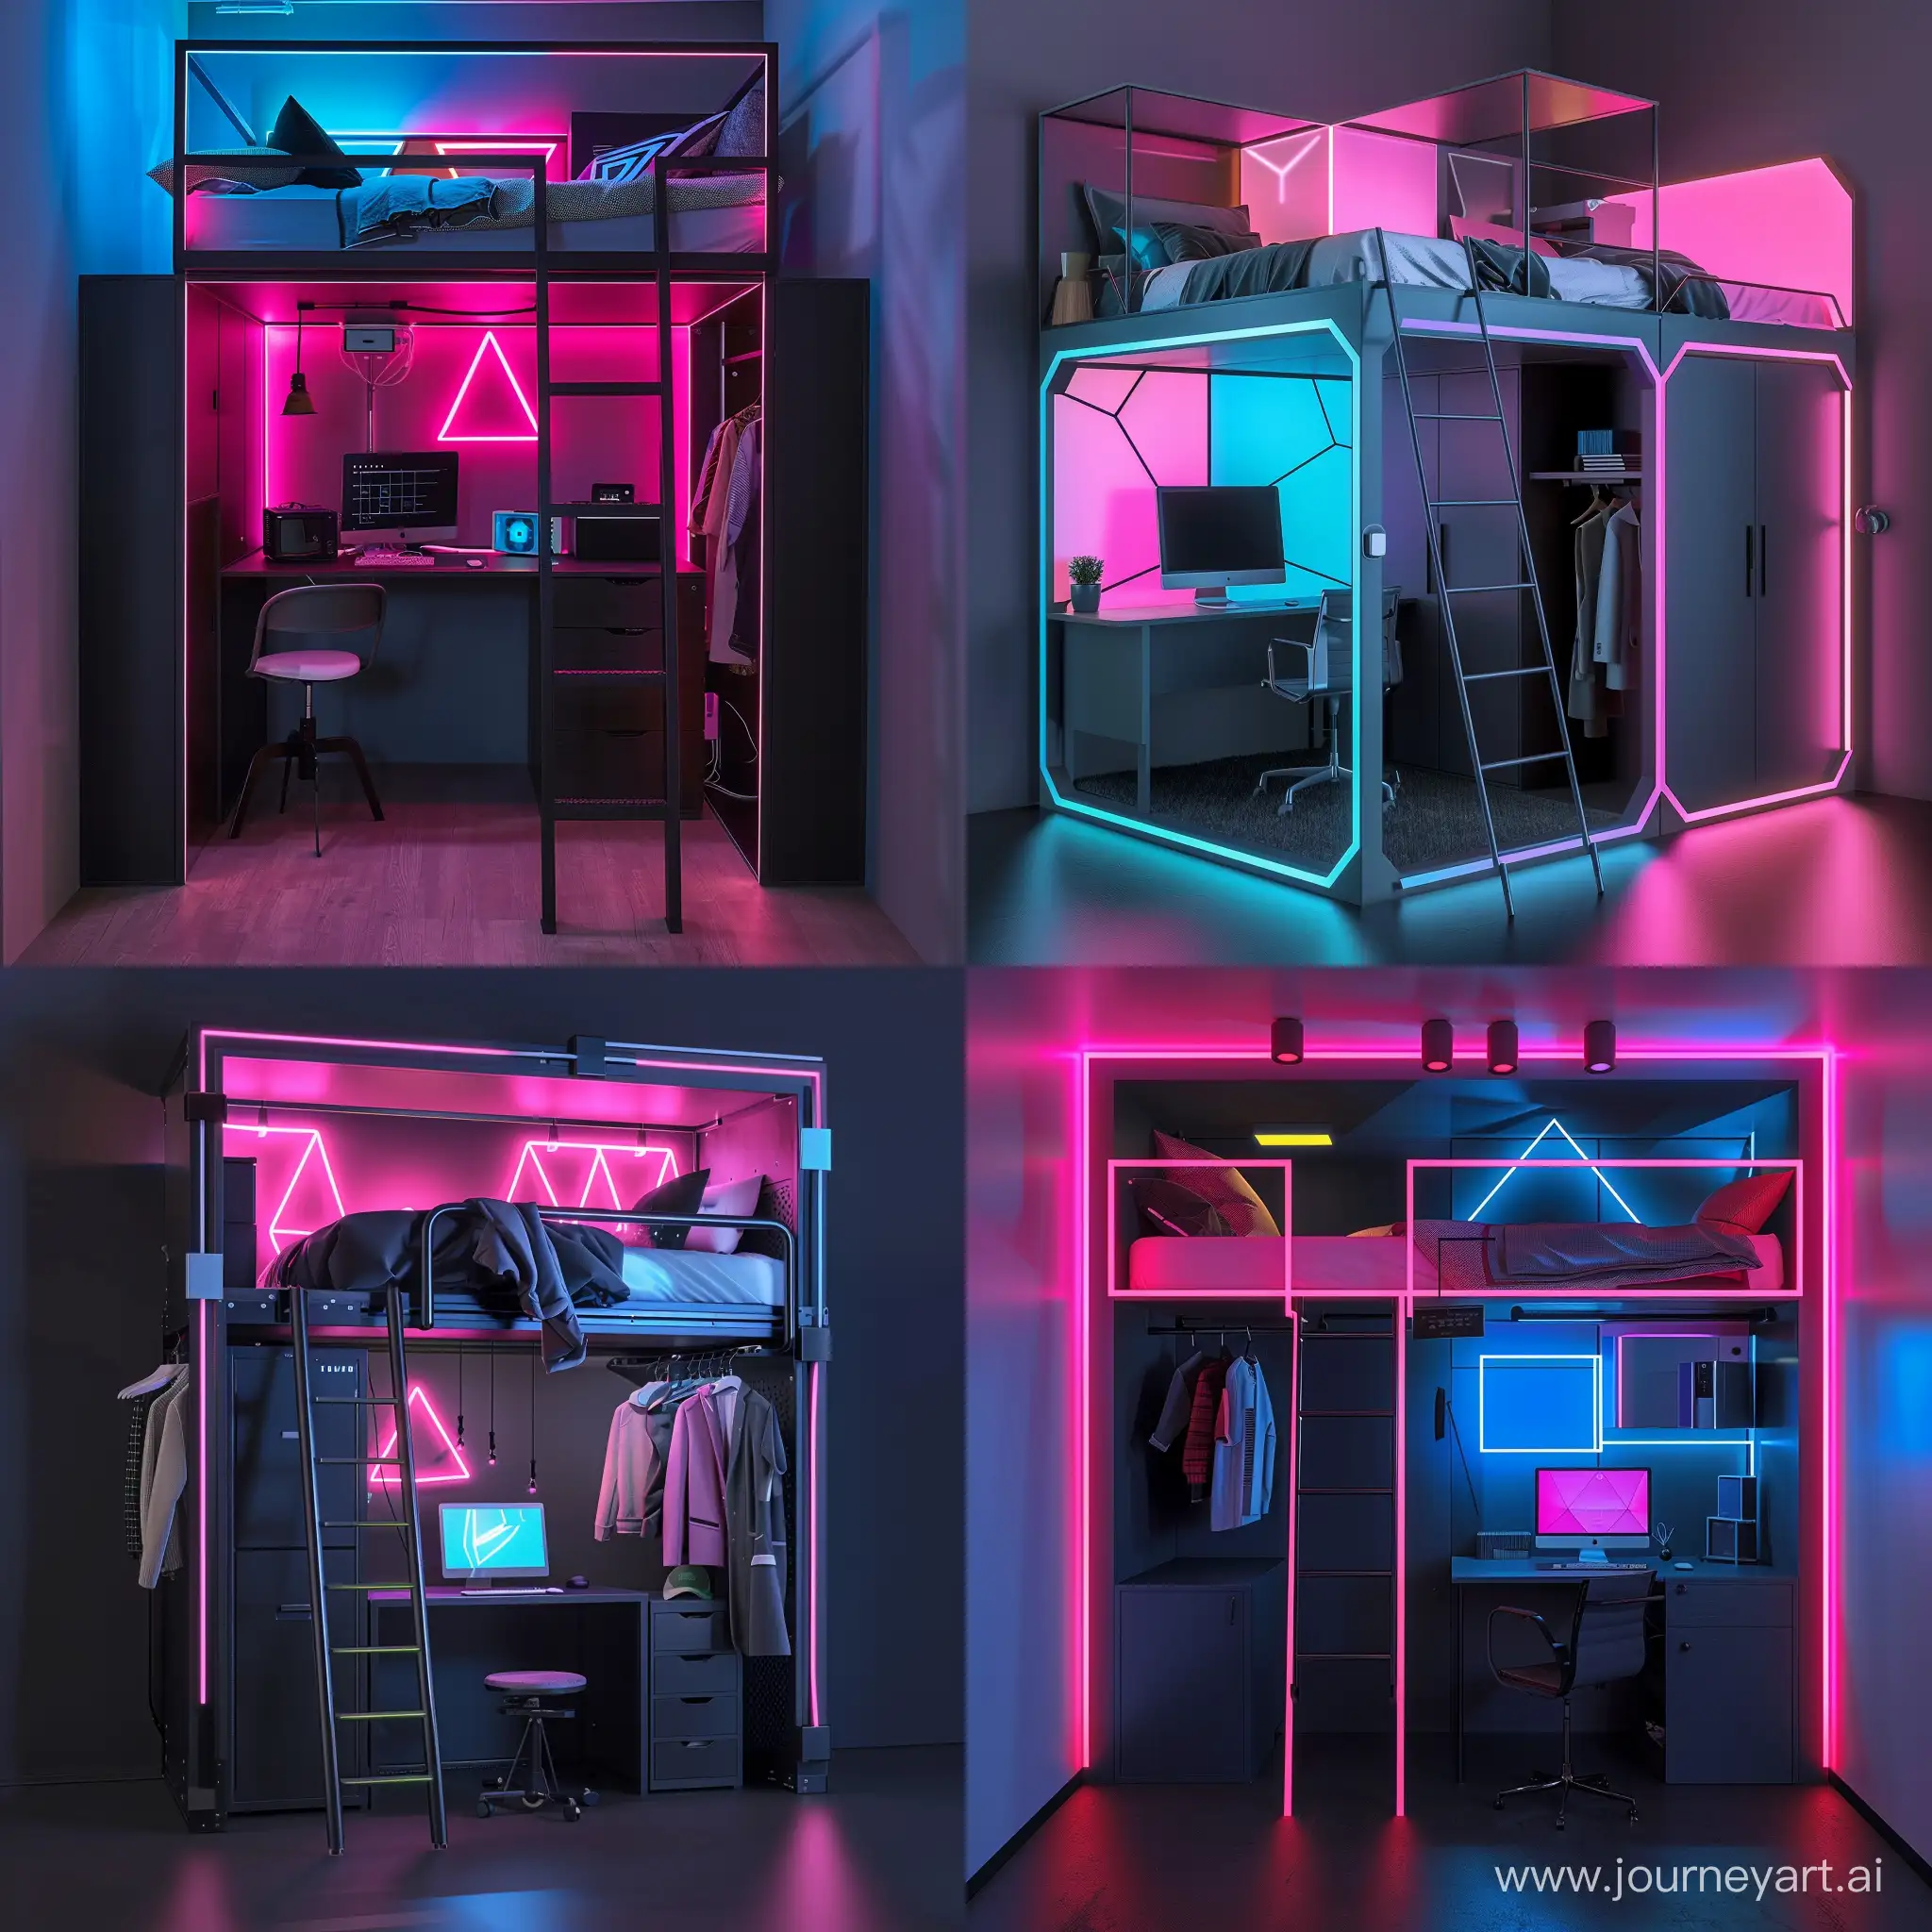 A unit containing a loft bed, a ladder, a desk with a computer, and a wardrobe in a small room, its dimensions are 3 meters, 2 meters, and a height of 3 meters. The room is lit in pink and bright blue, with geometric lighting shapes on the walls. The room colors are black and gray.